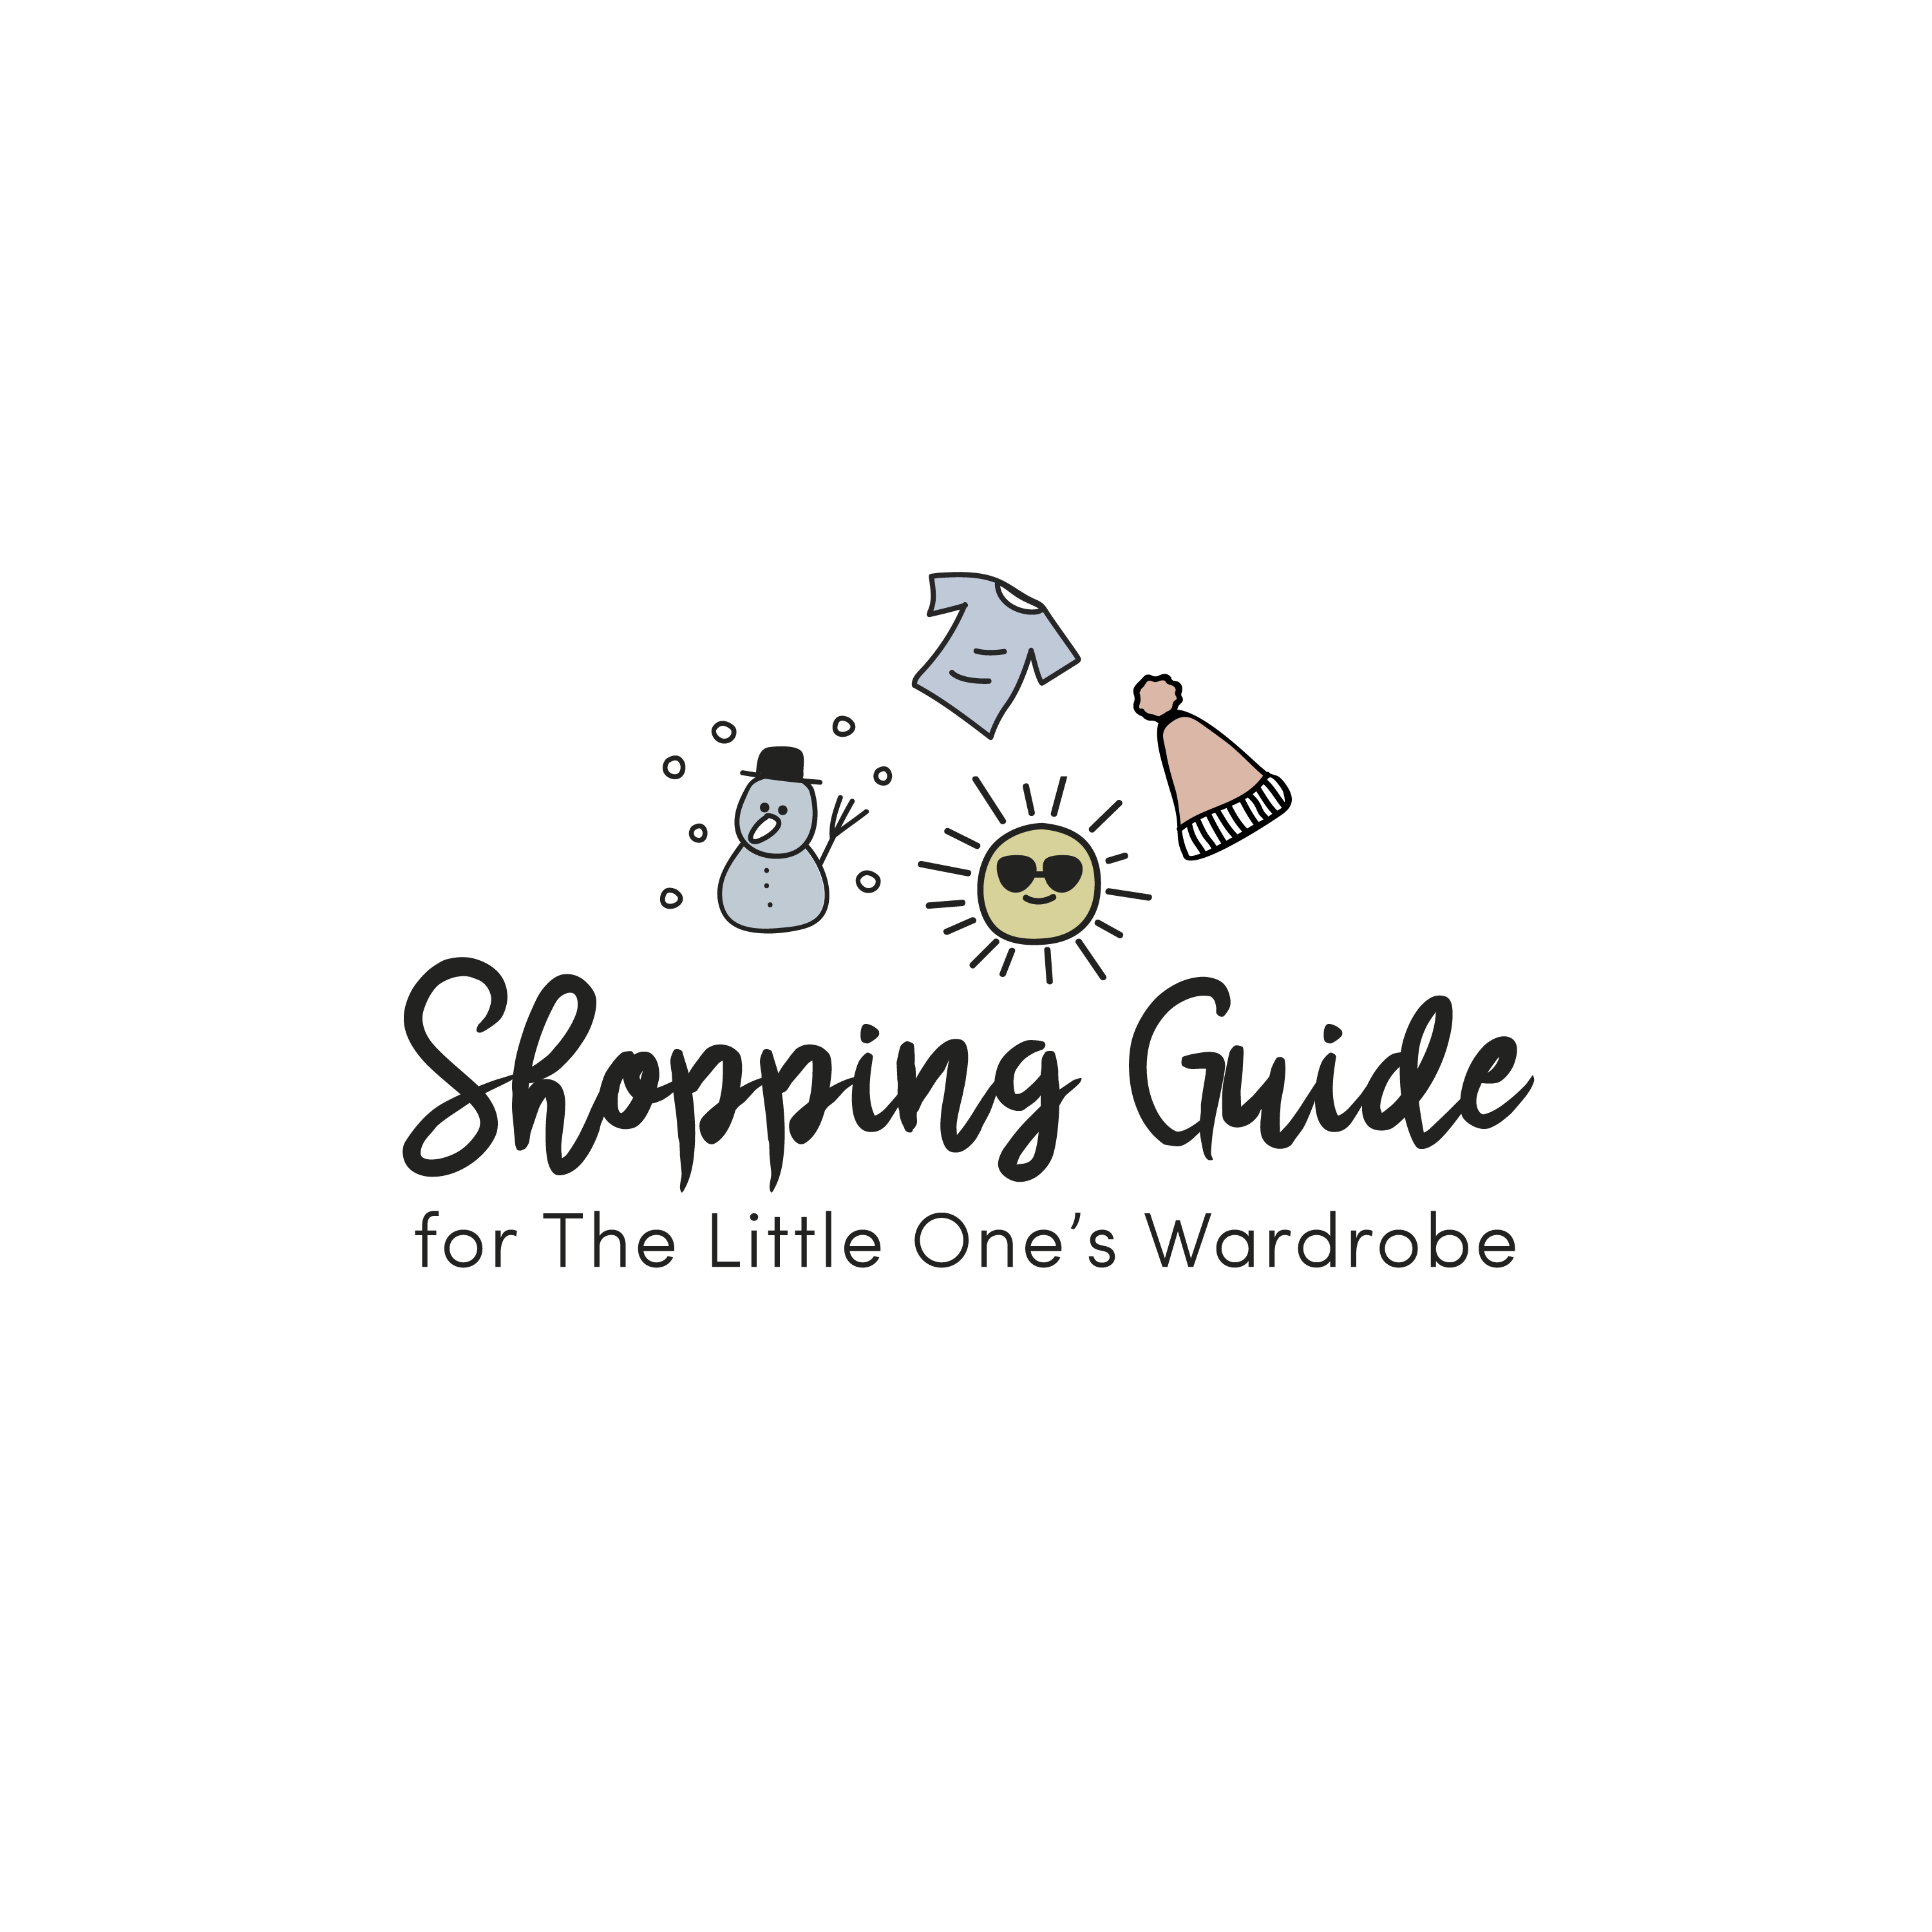 English version of the logo of the shopping guide for the little one&